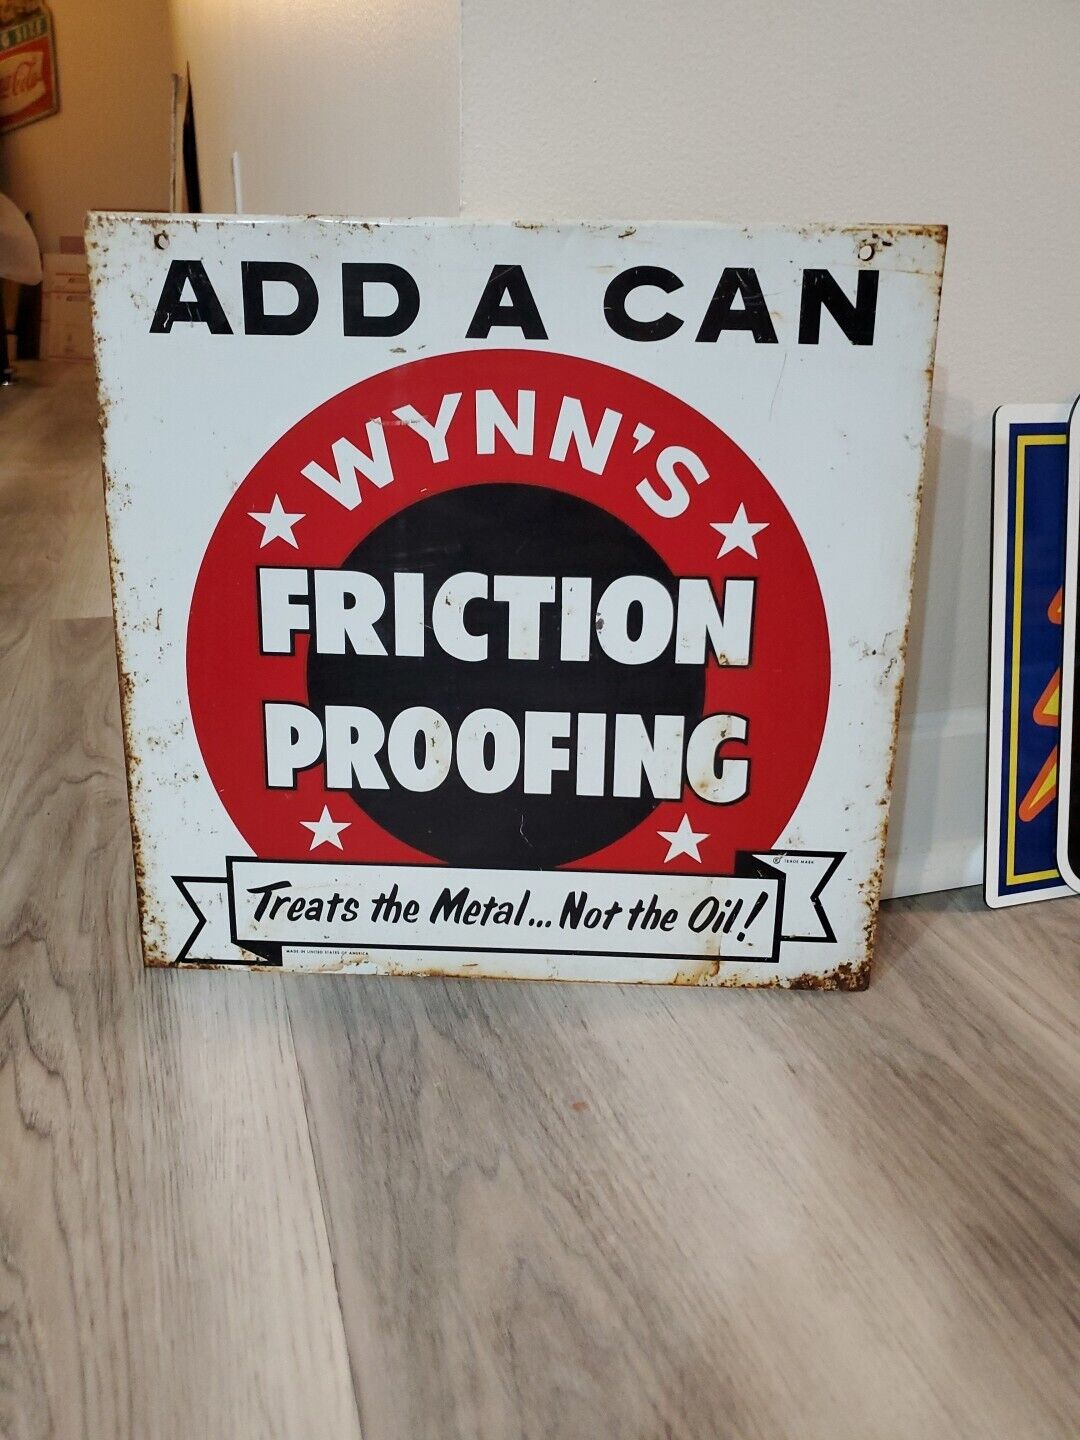 c.1960s Original Vintage Wynn's Friction Proofing Oil Sign Add A Can Rack Topper